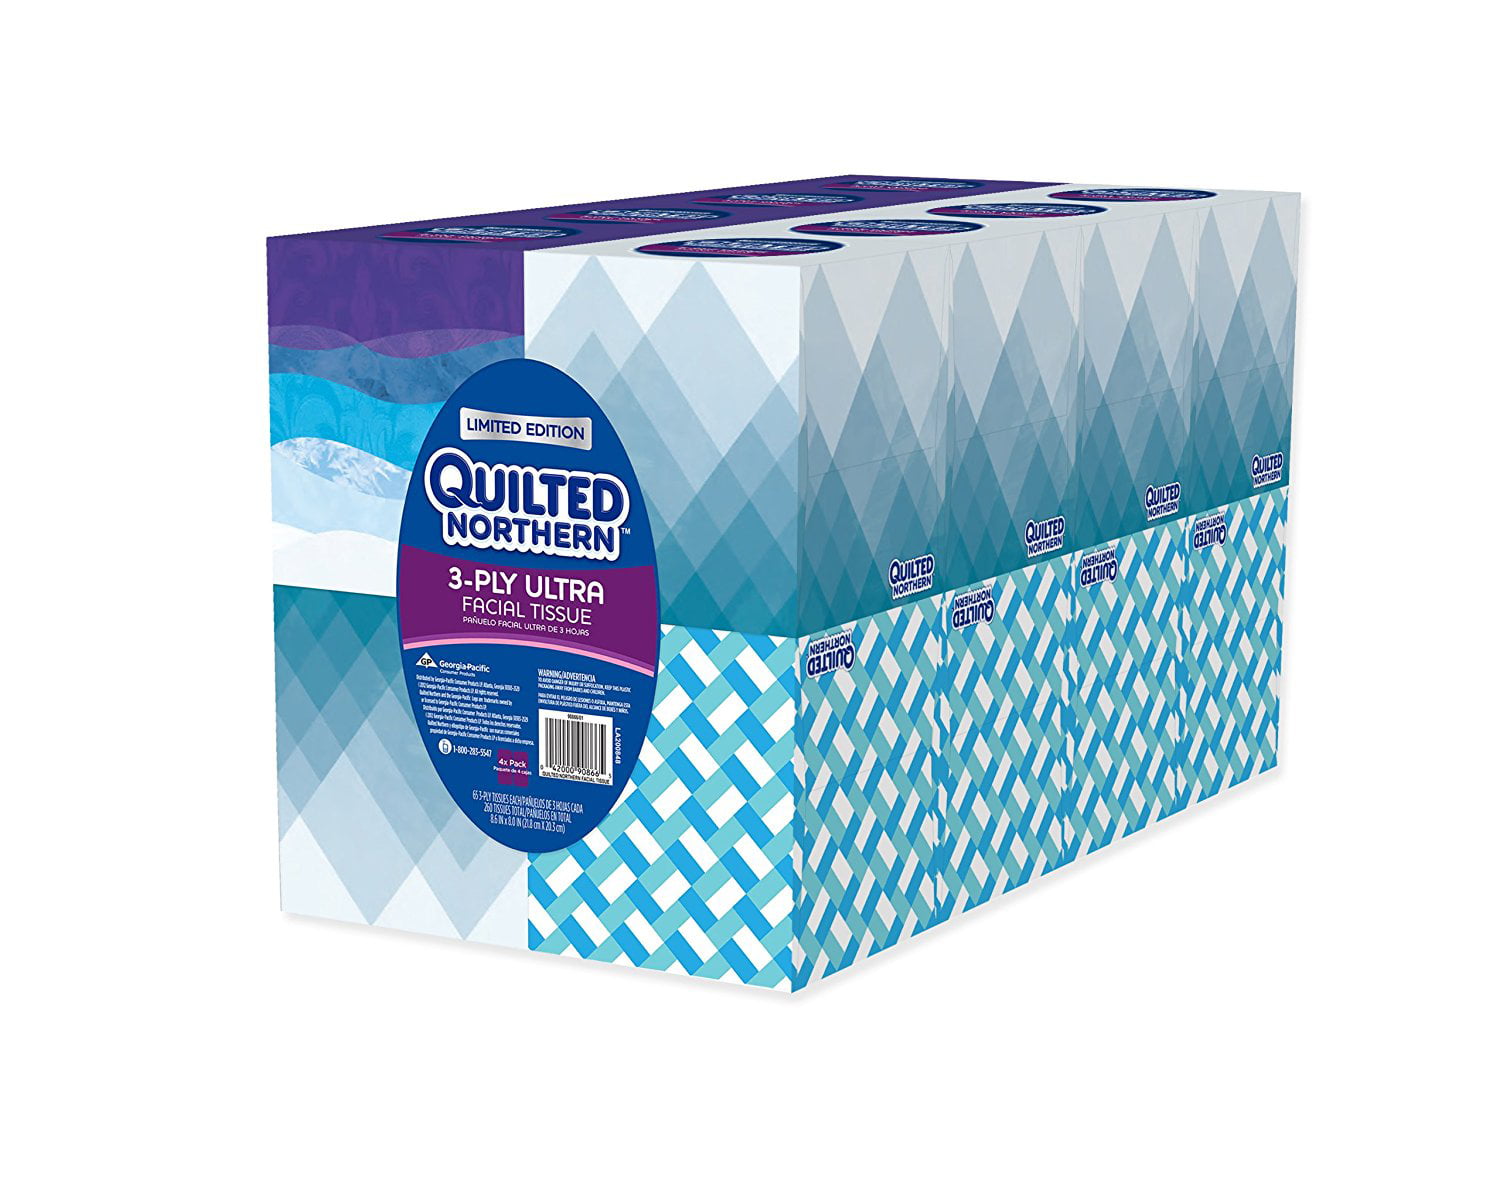 6 Boxes Quilted Northern Ultra Facial Tissue Cube 